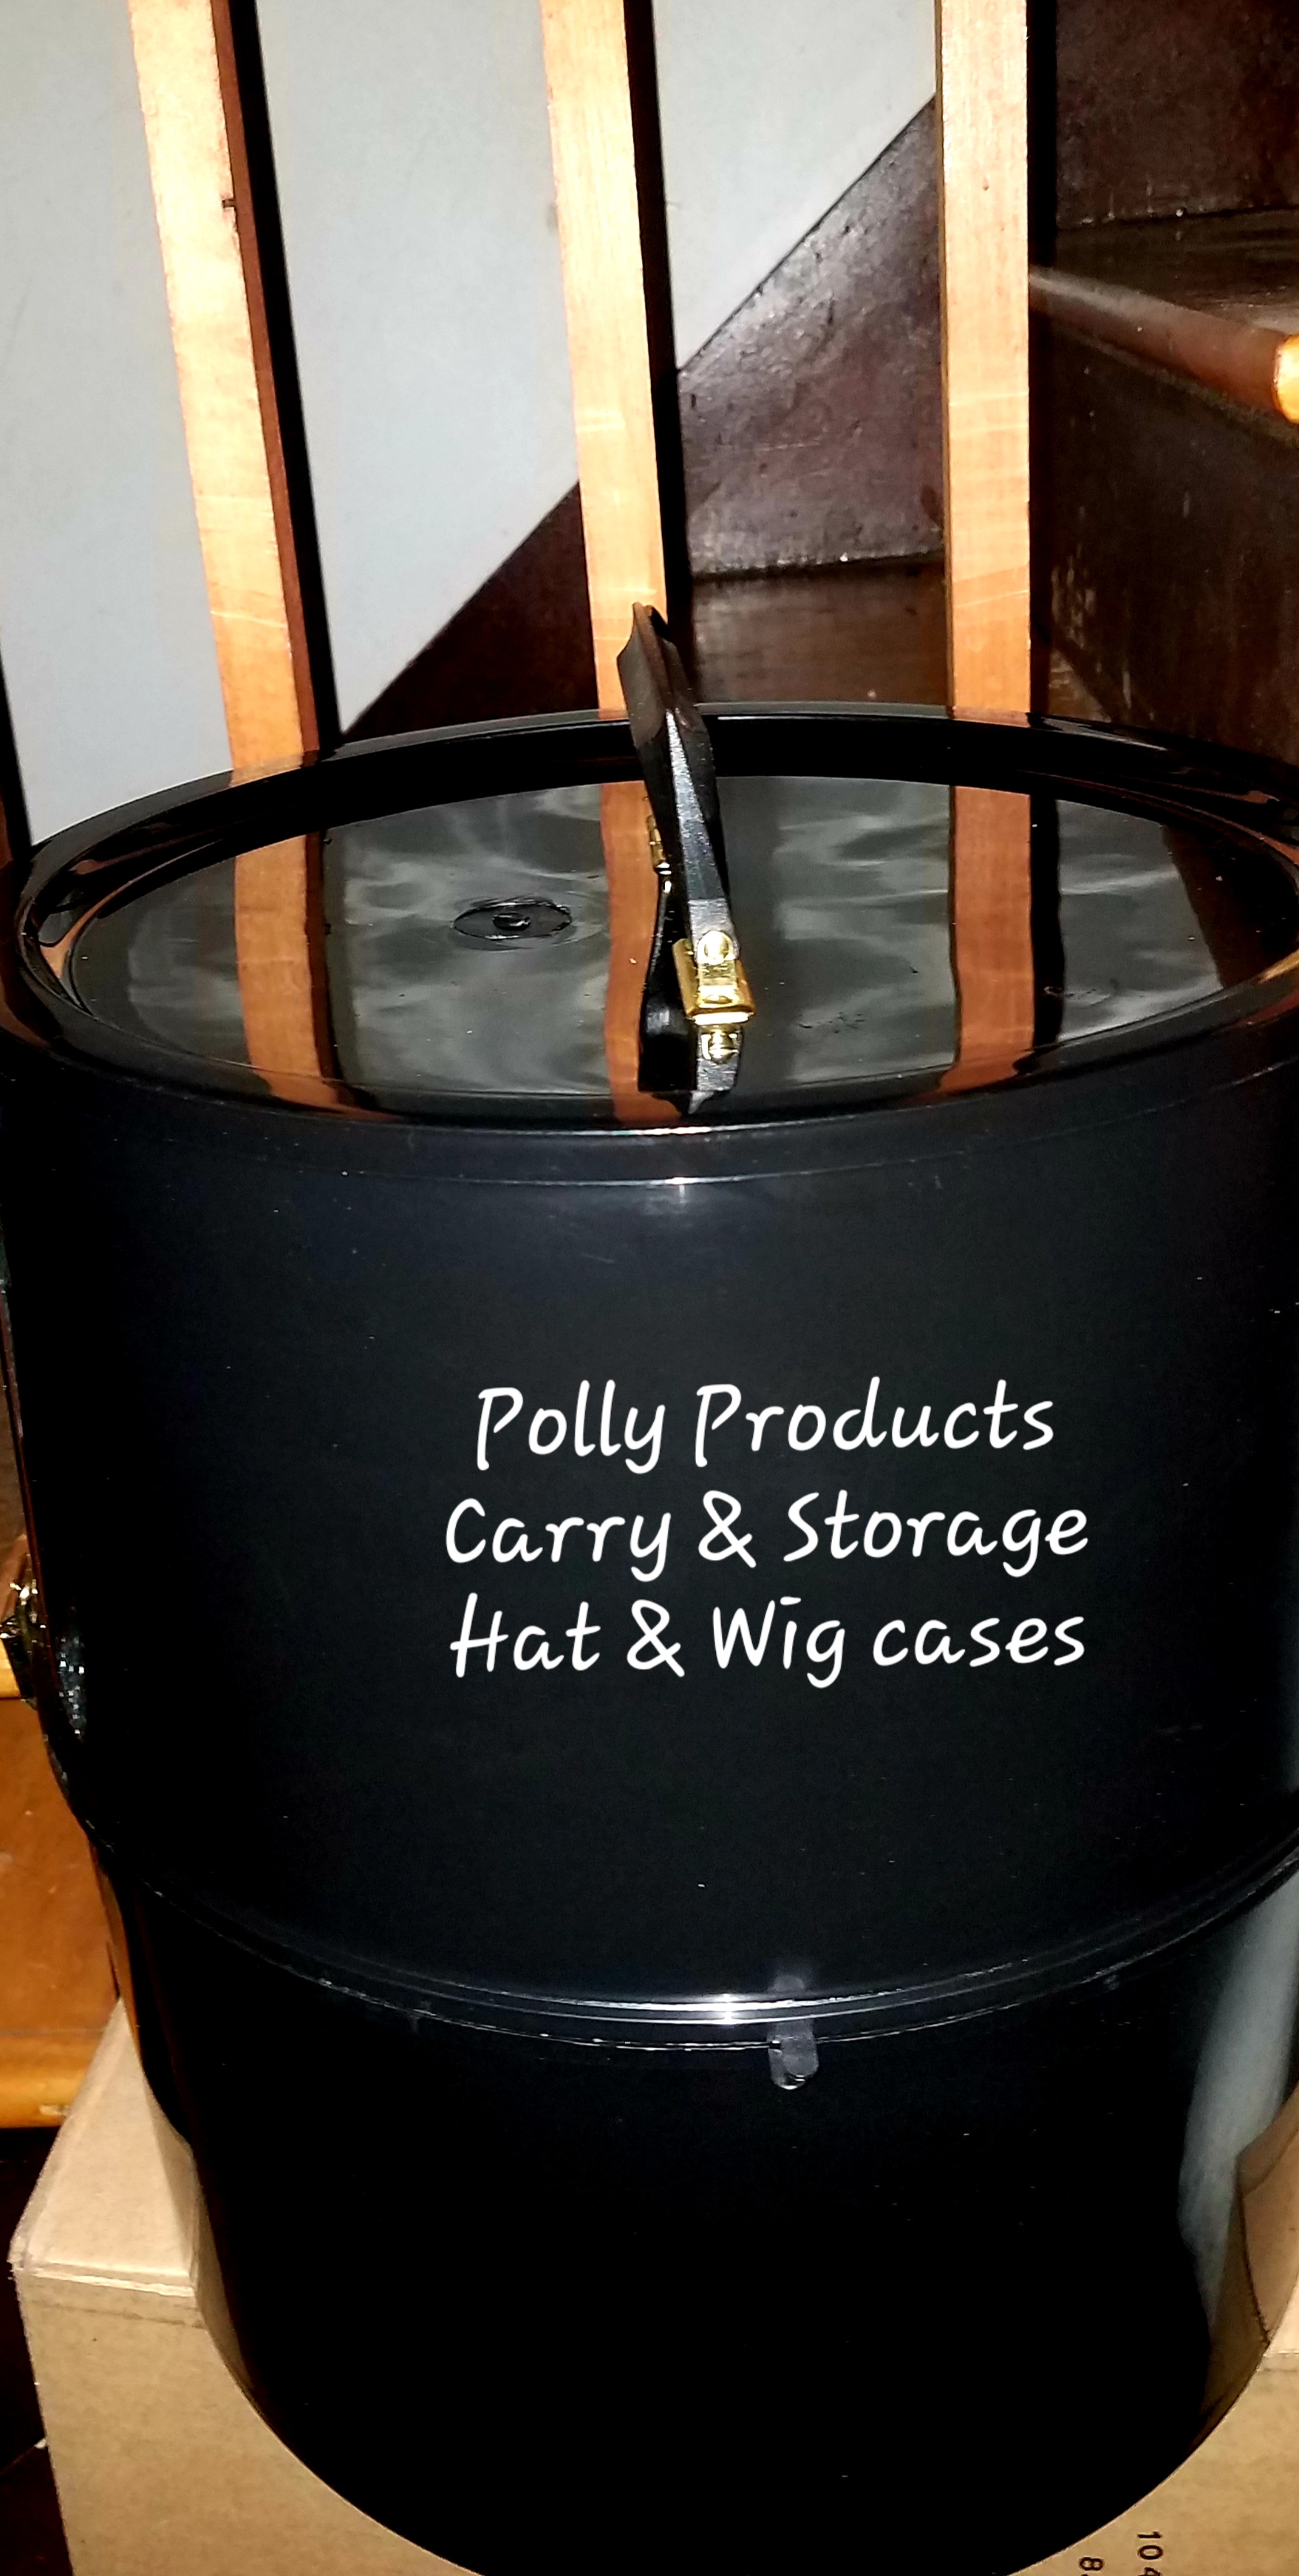 #CC2035BK PLASTIC CARRY/STORAGE CASE FROM POLLY PRODUCTS